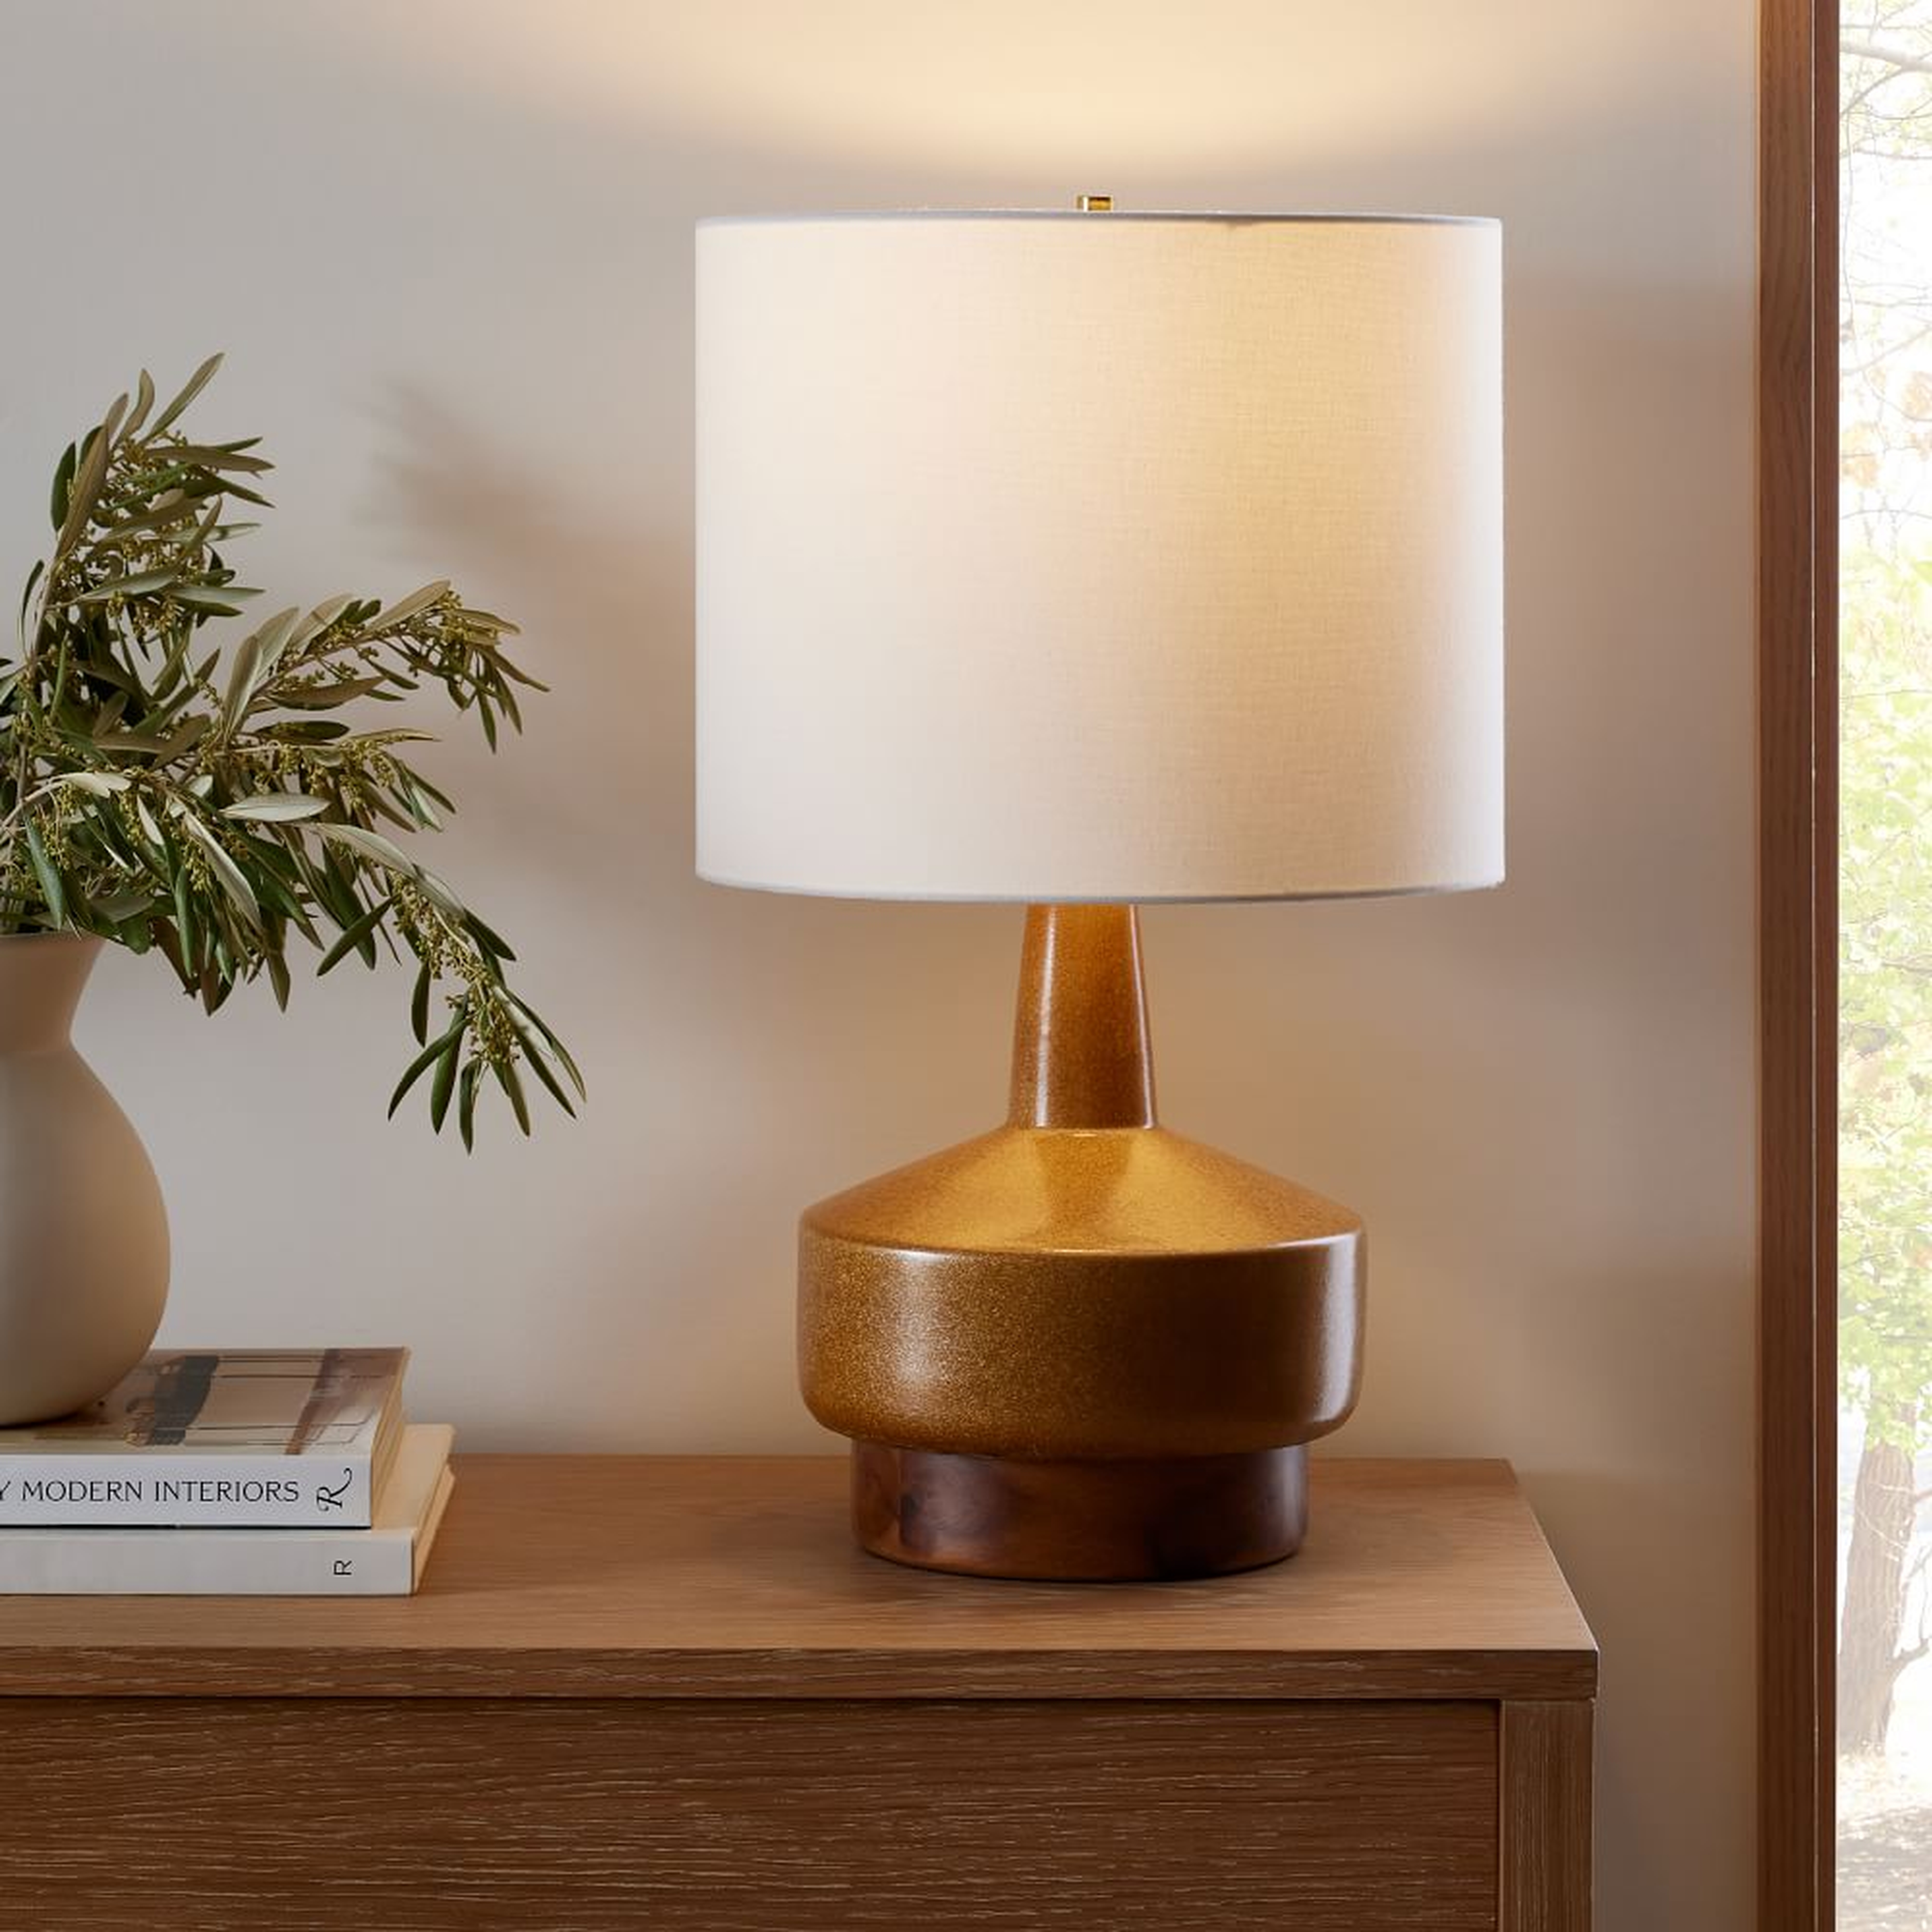 Wood and Ceramic Table Lamp Reactive Rust White Linen (22") - West Elm